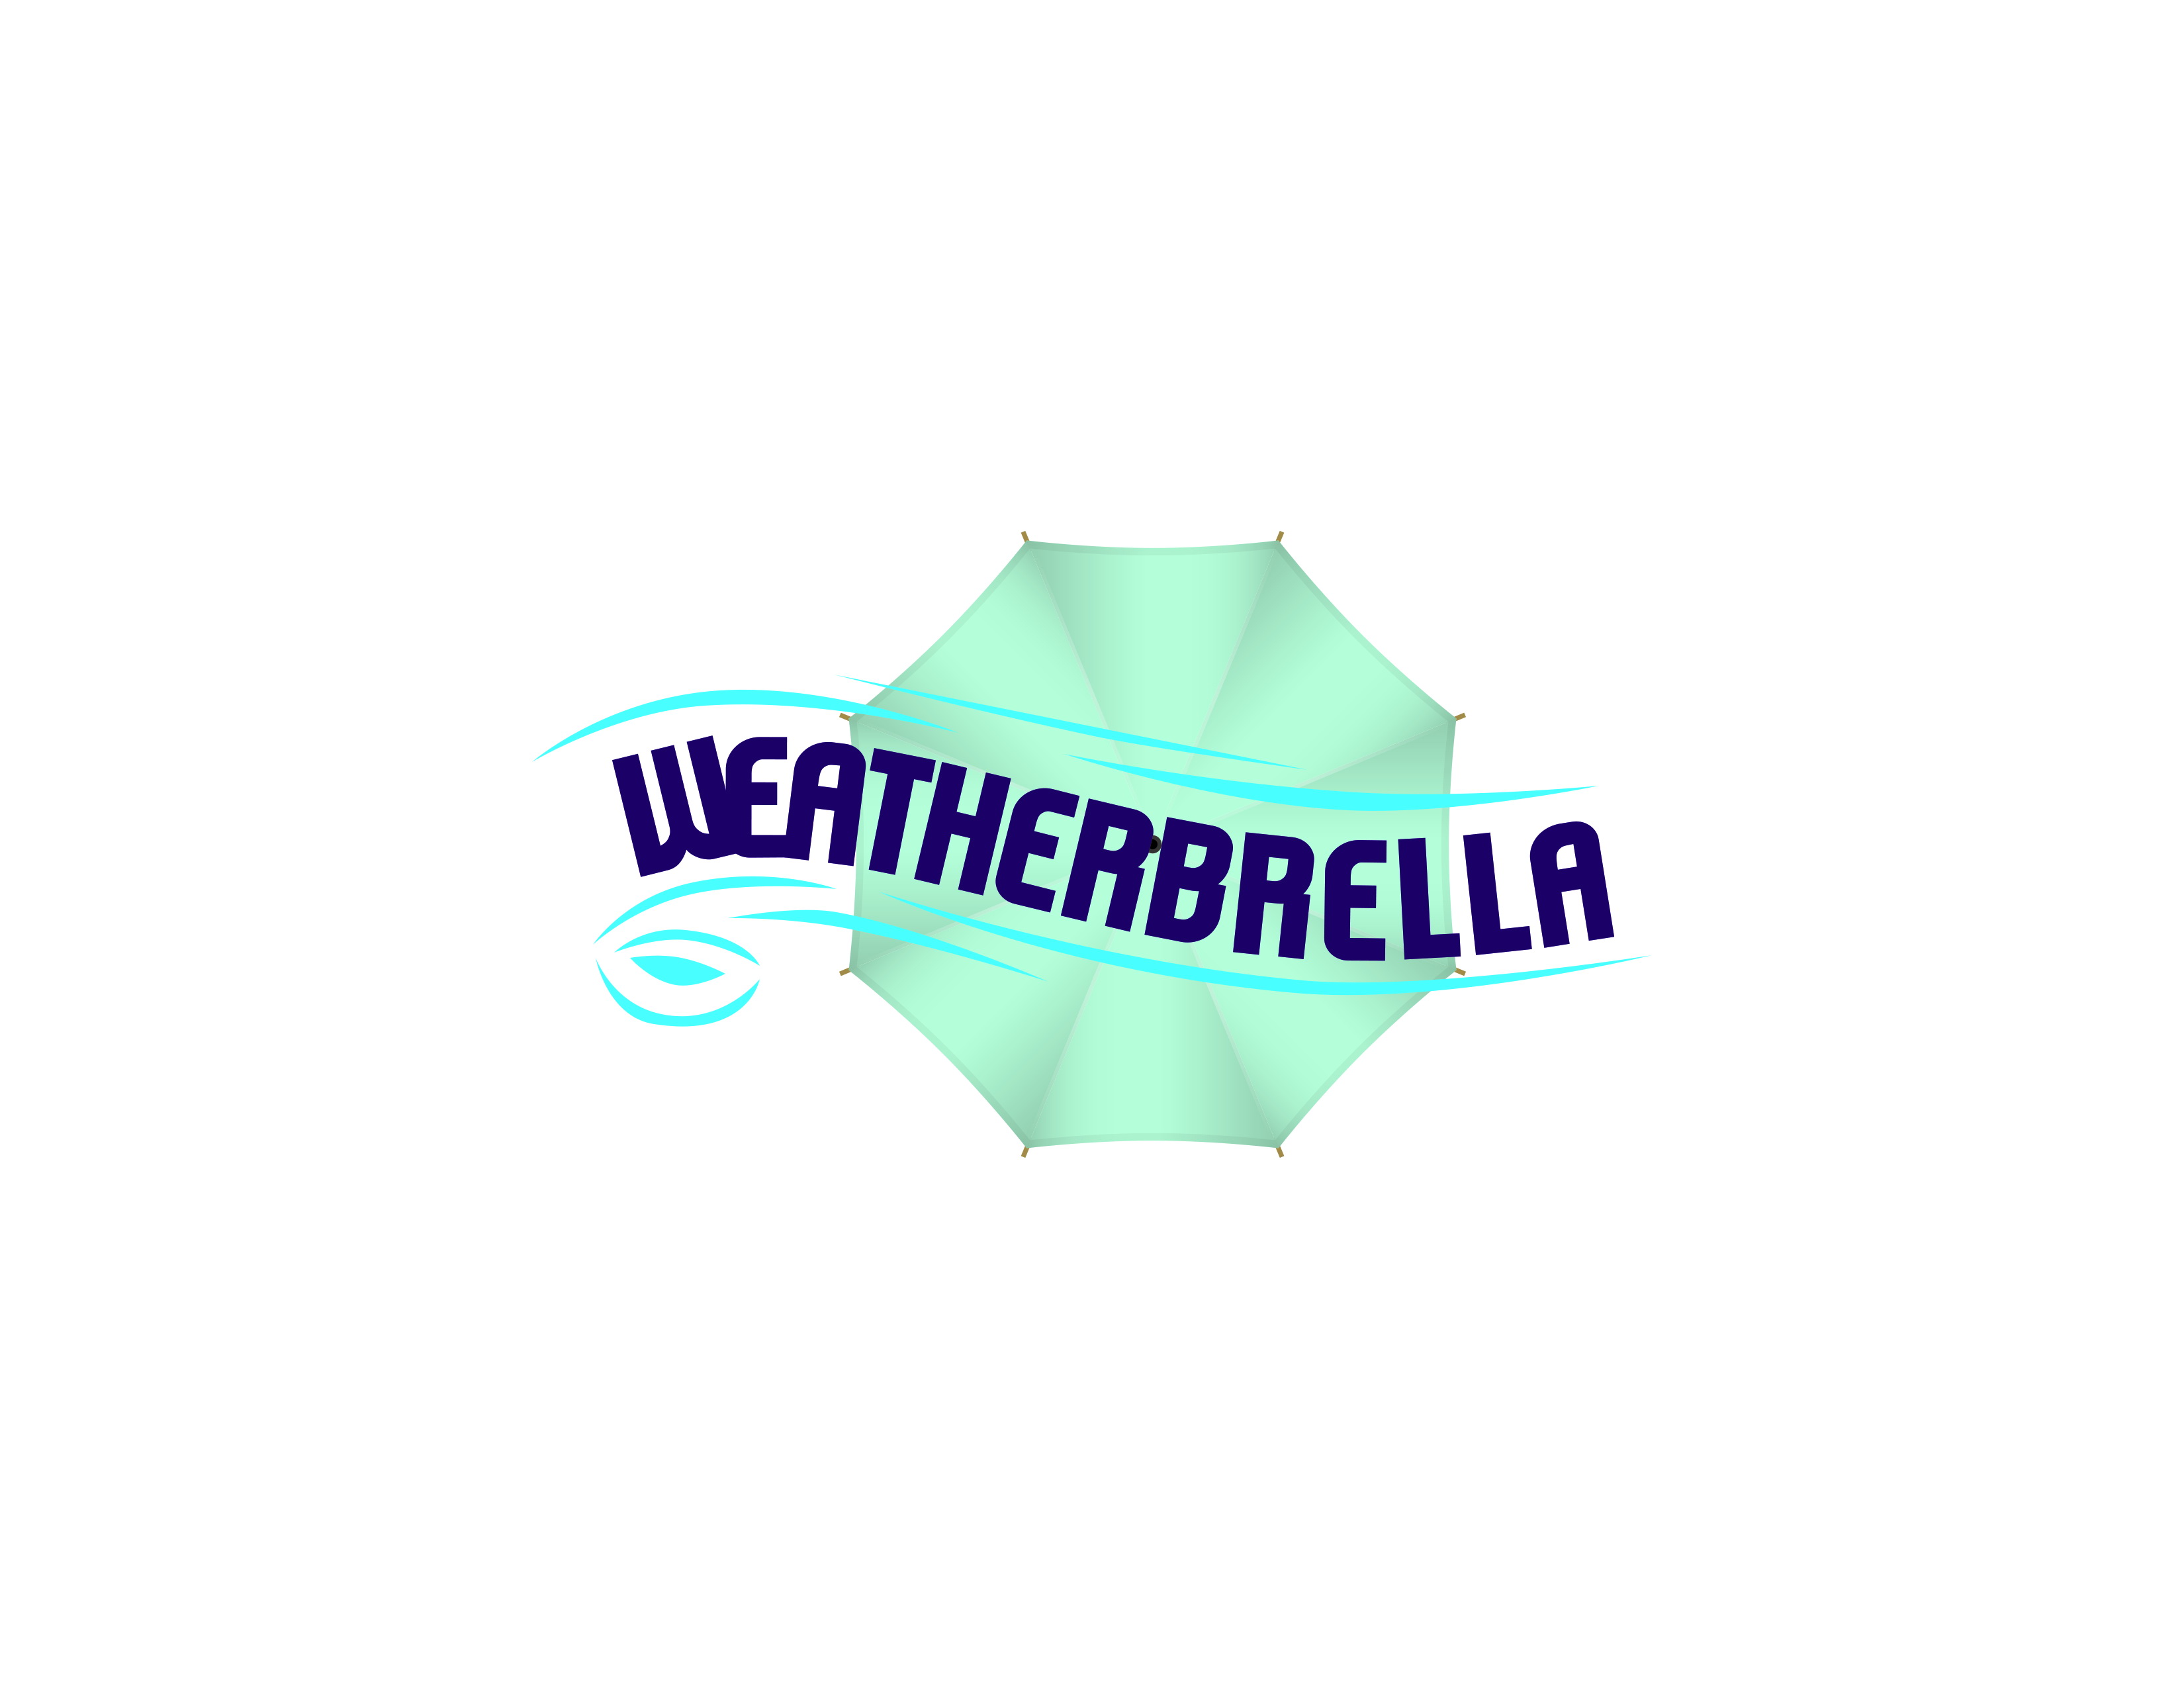 Weatherbrella is a household invention which will provide better outdoor protection during bad weather.